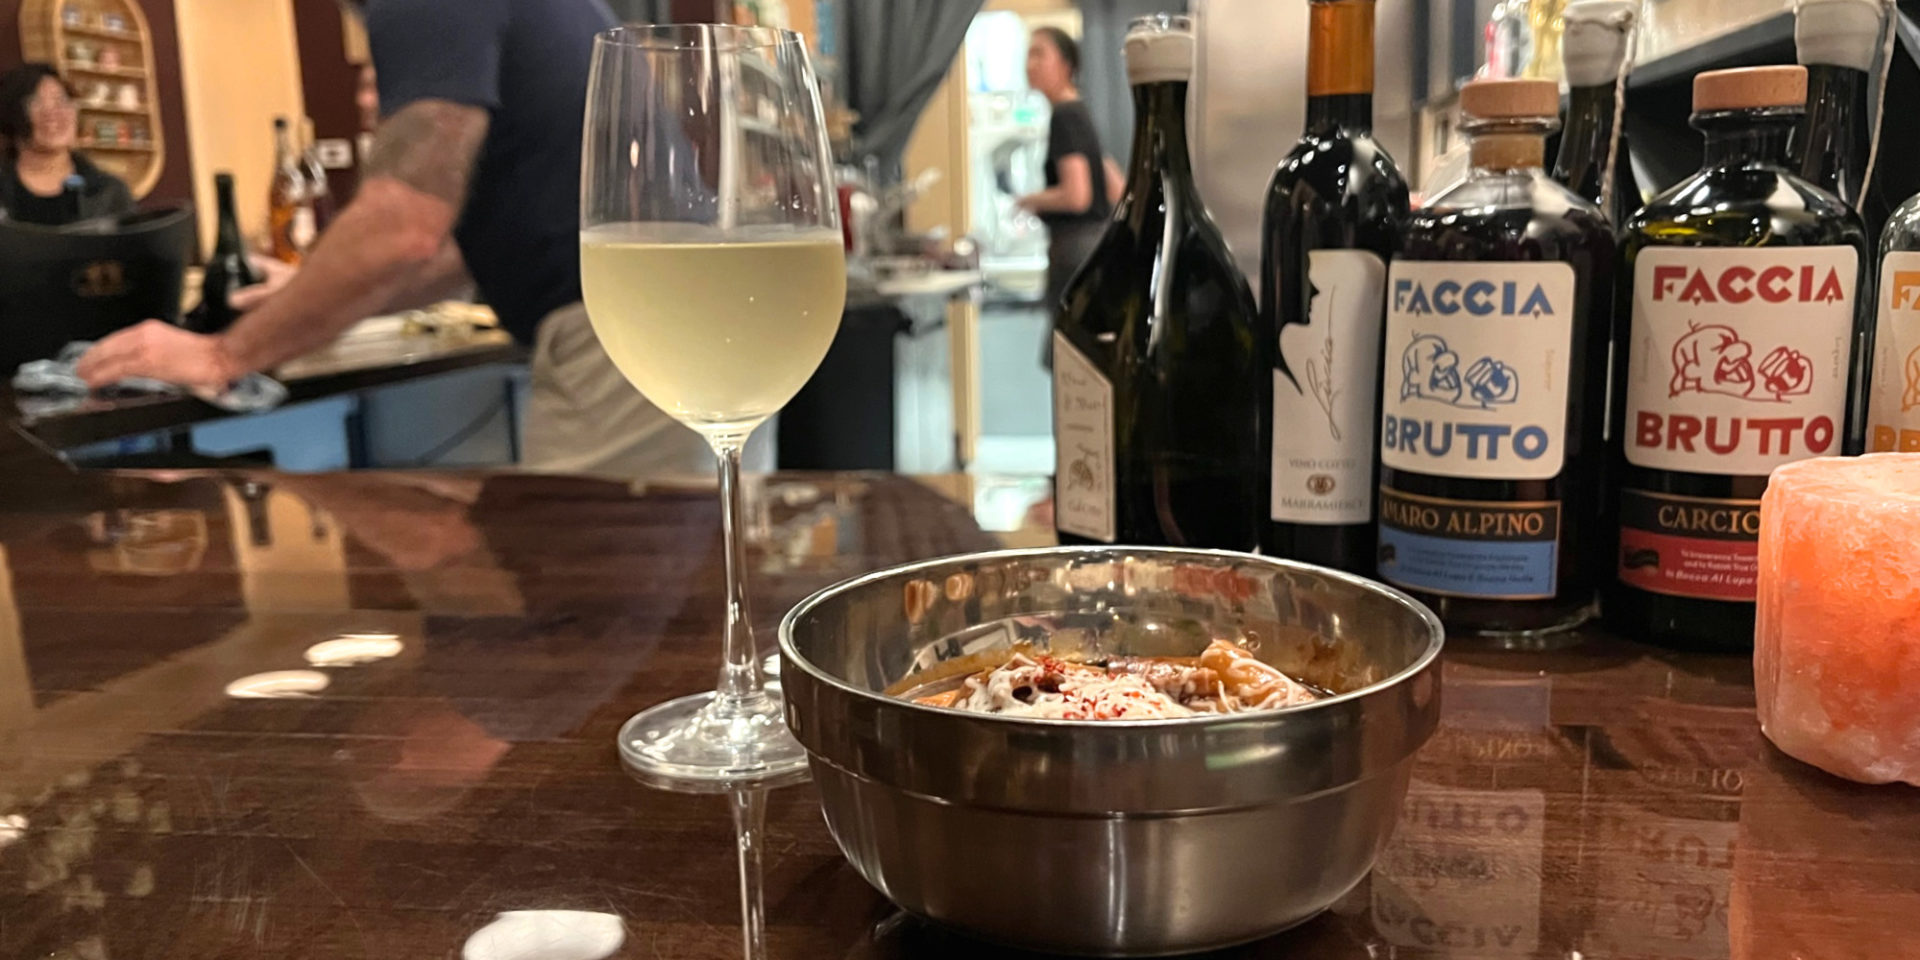 A dish and petit wine as part of Alice's Diner experience inside Ladro Enoteca. Photo by Alyssa Buckley.